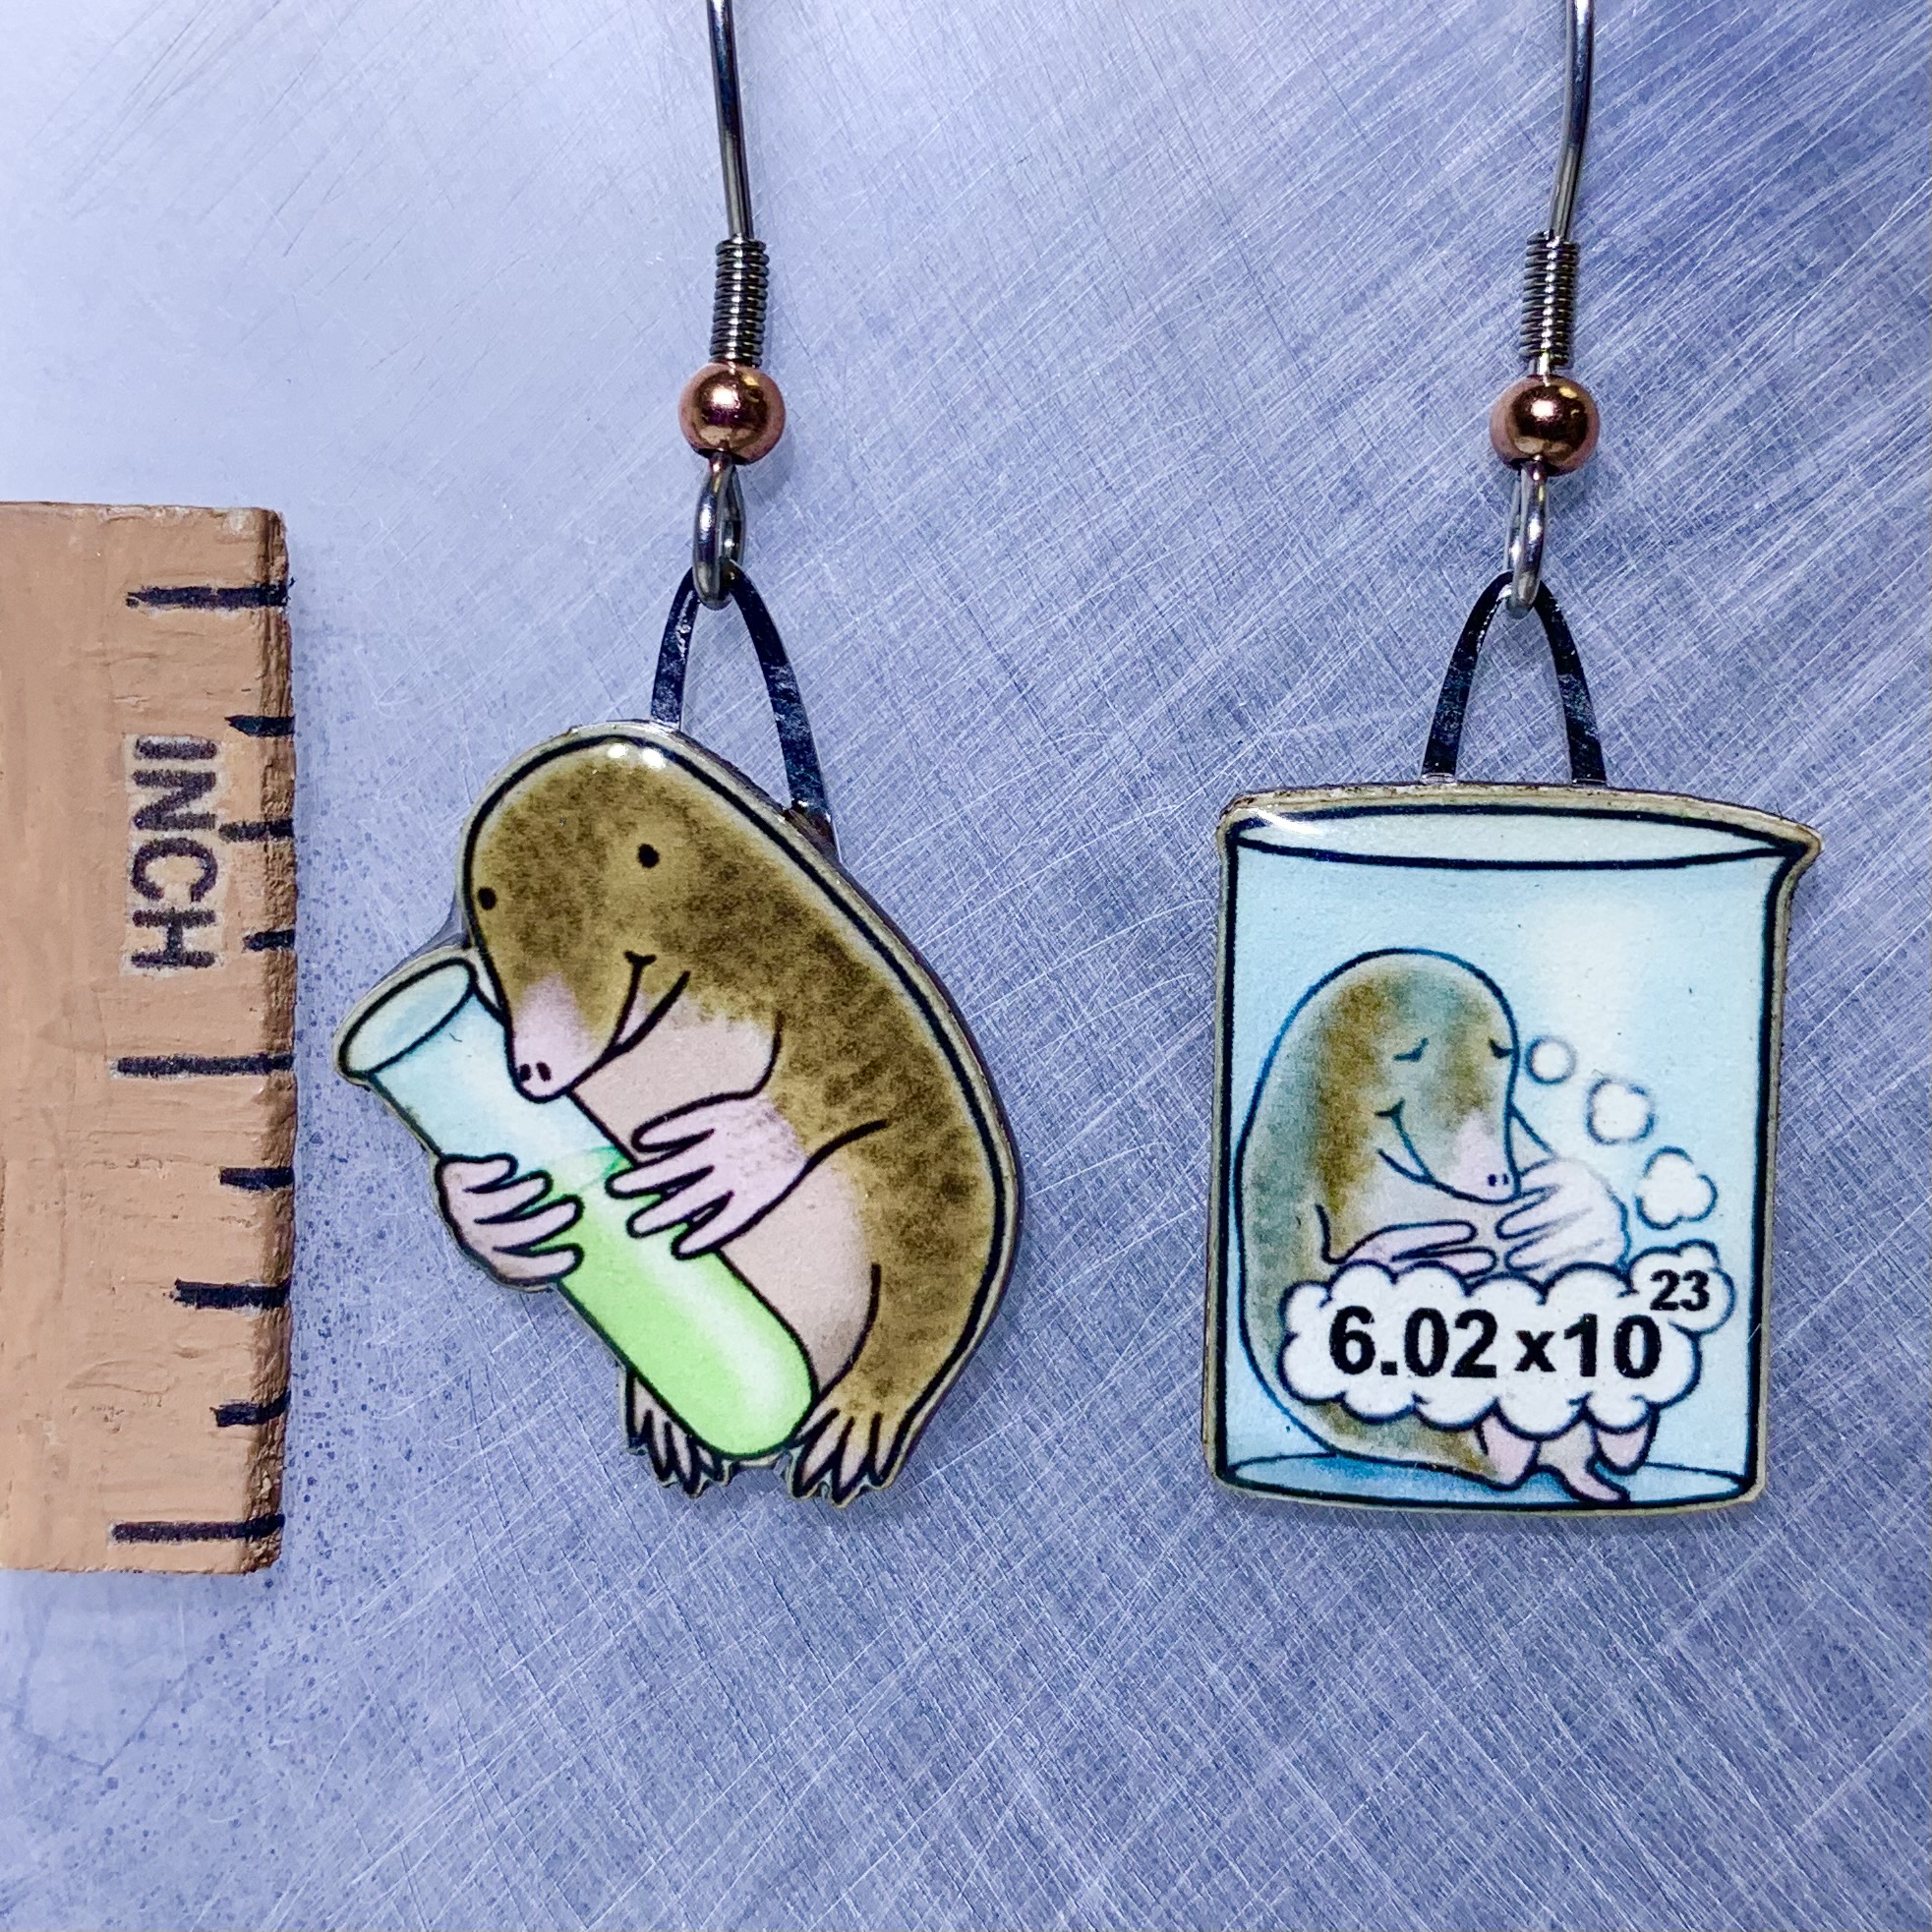 Picture shown is of 1 inch tall pair of earrings of Chemistry Mole.